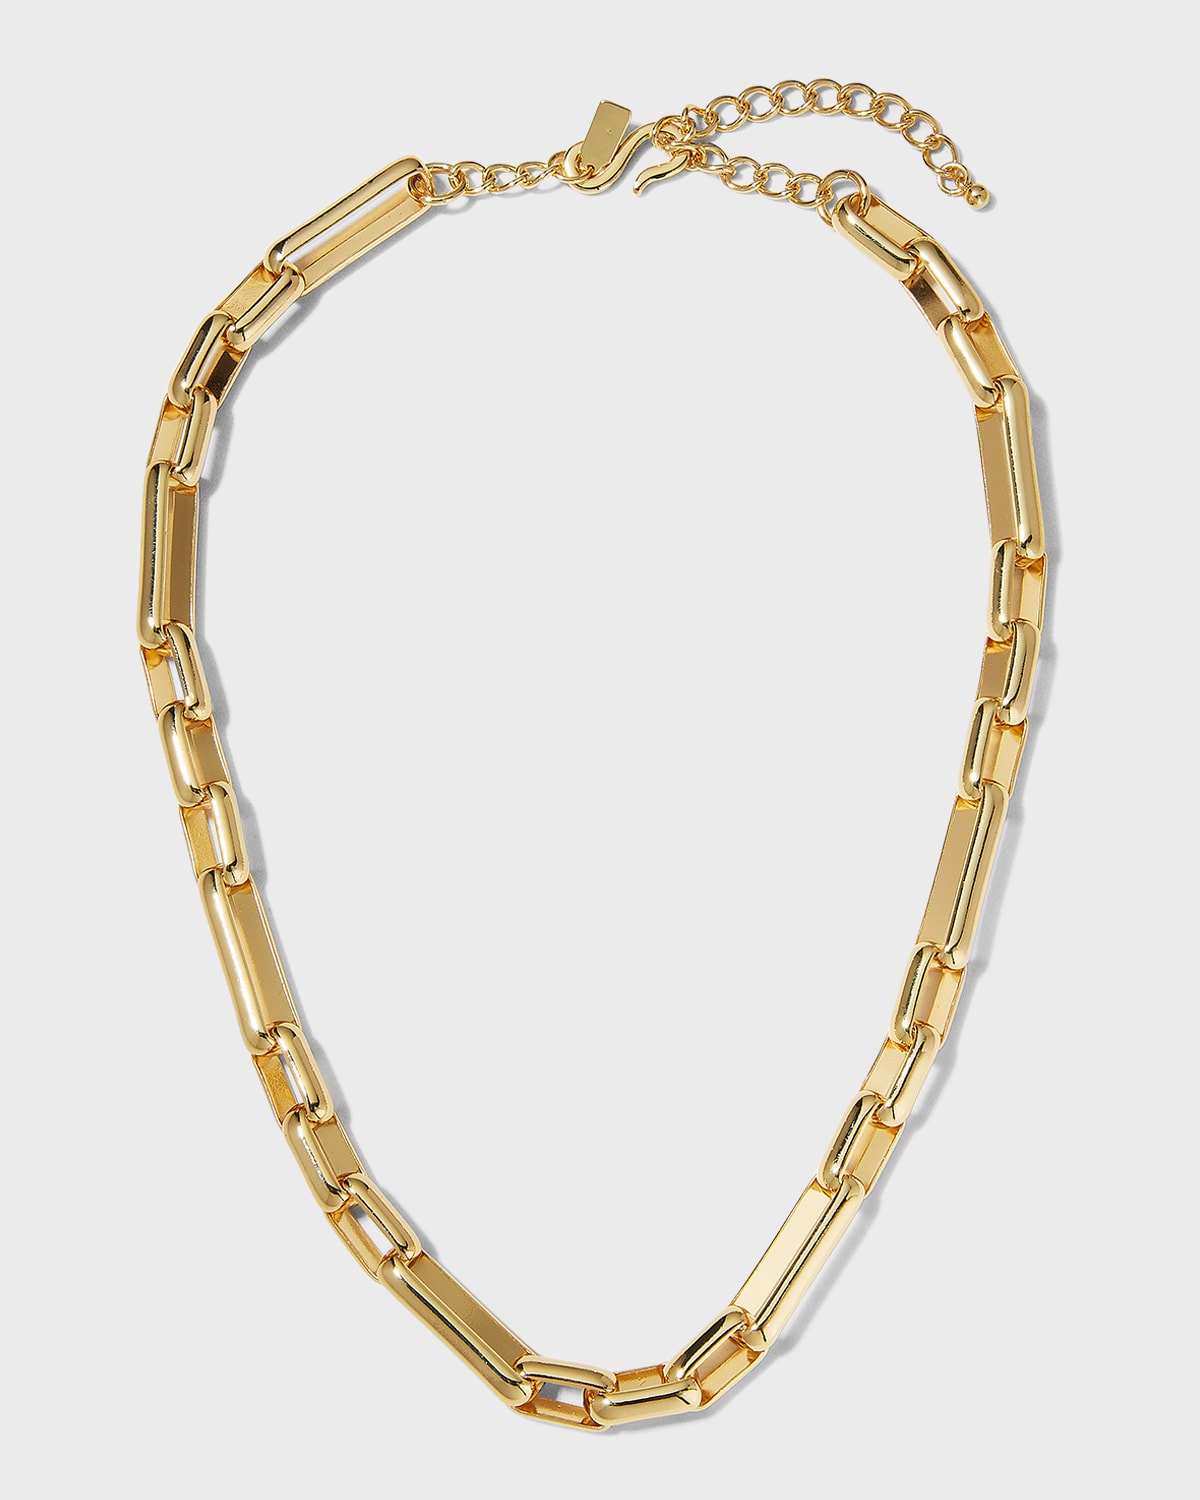 KENNETH JAY LANE GOLD CHAIN LINK NECKLACE